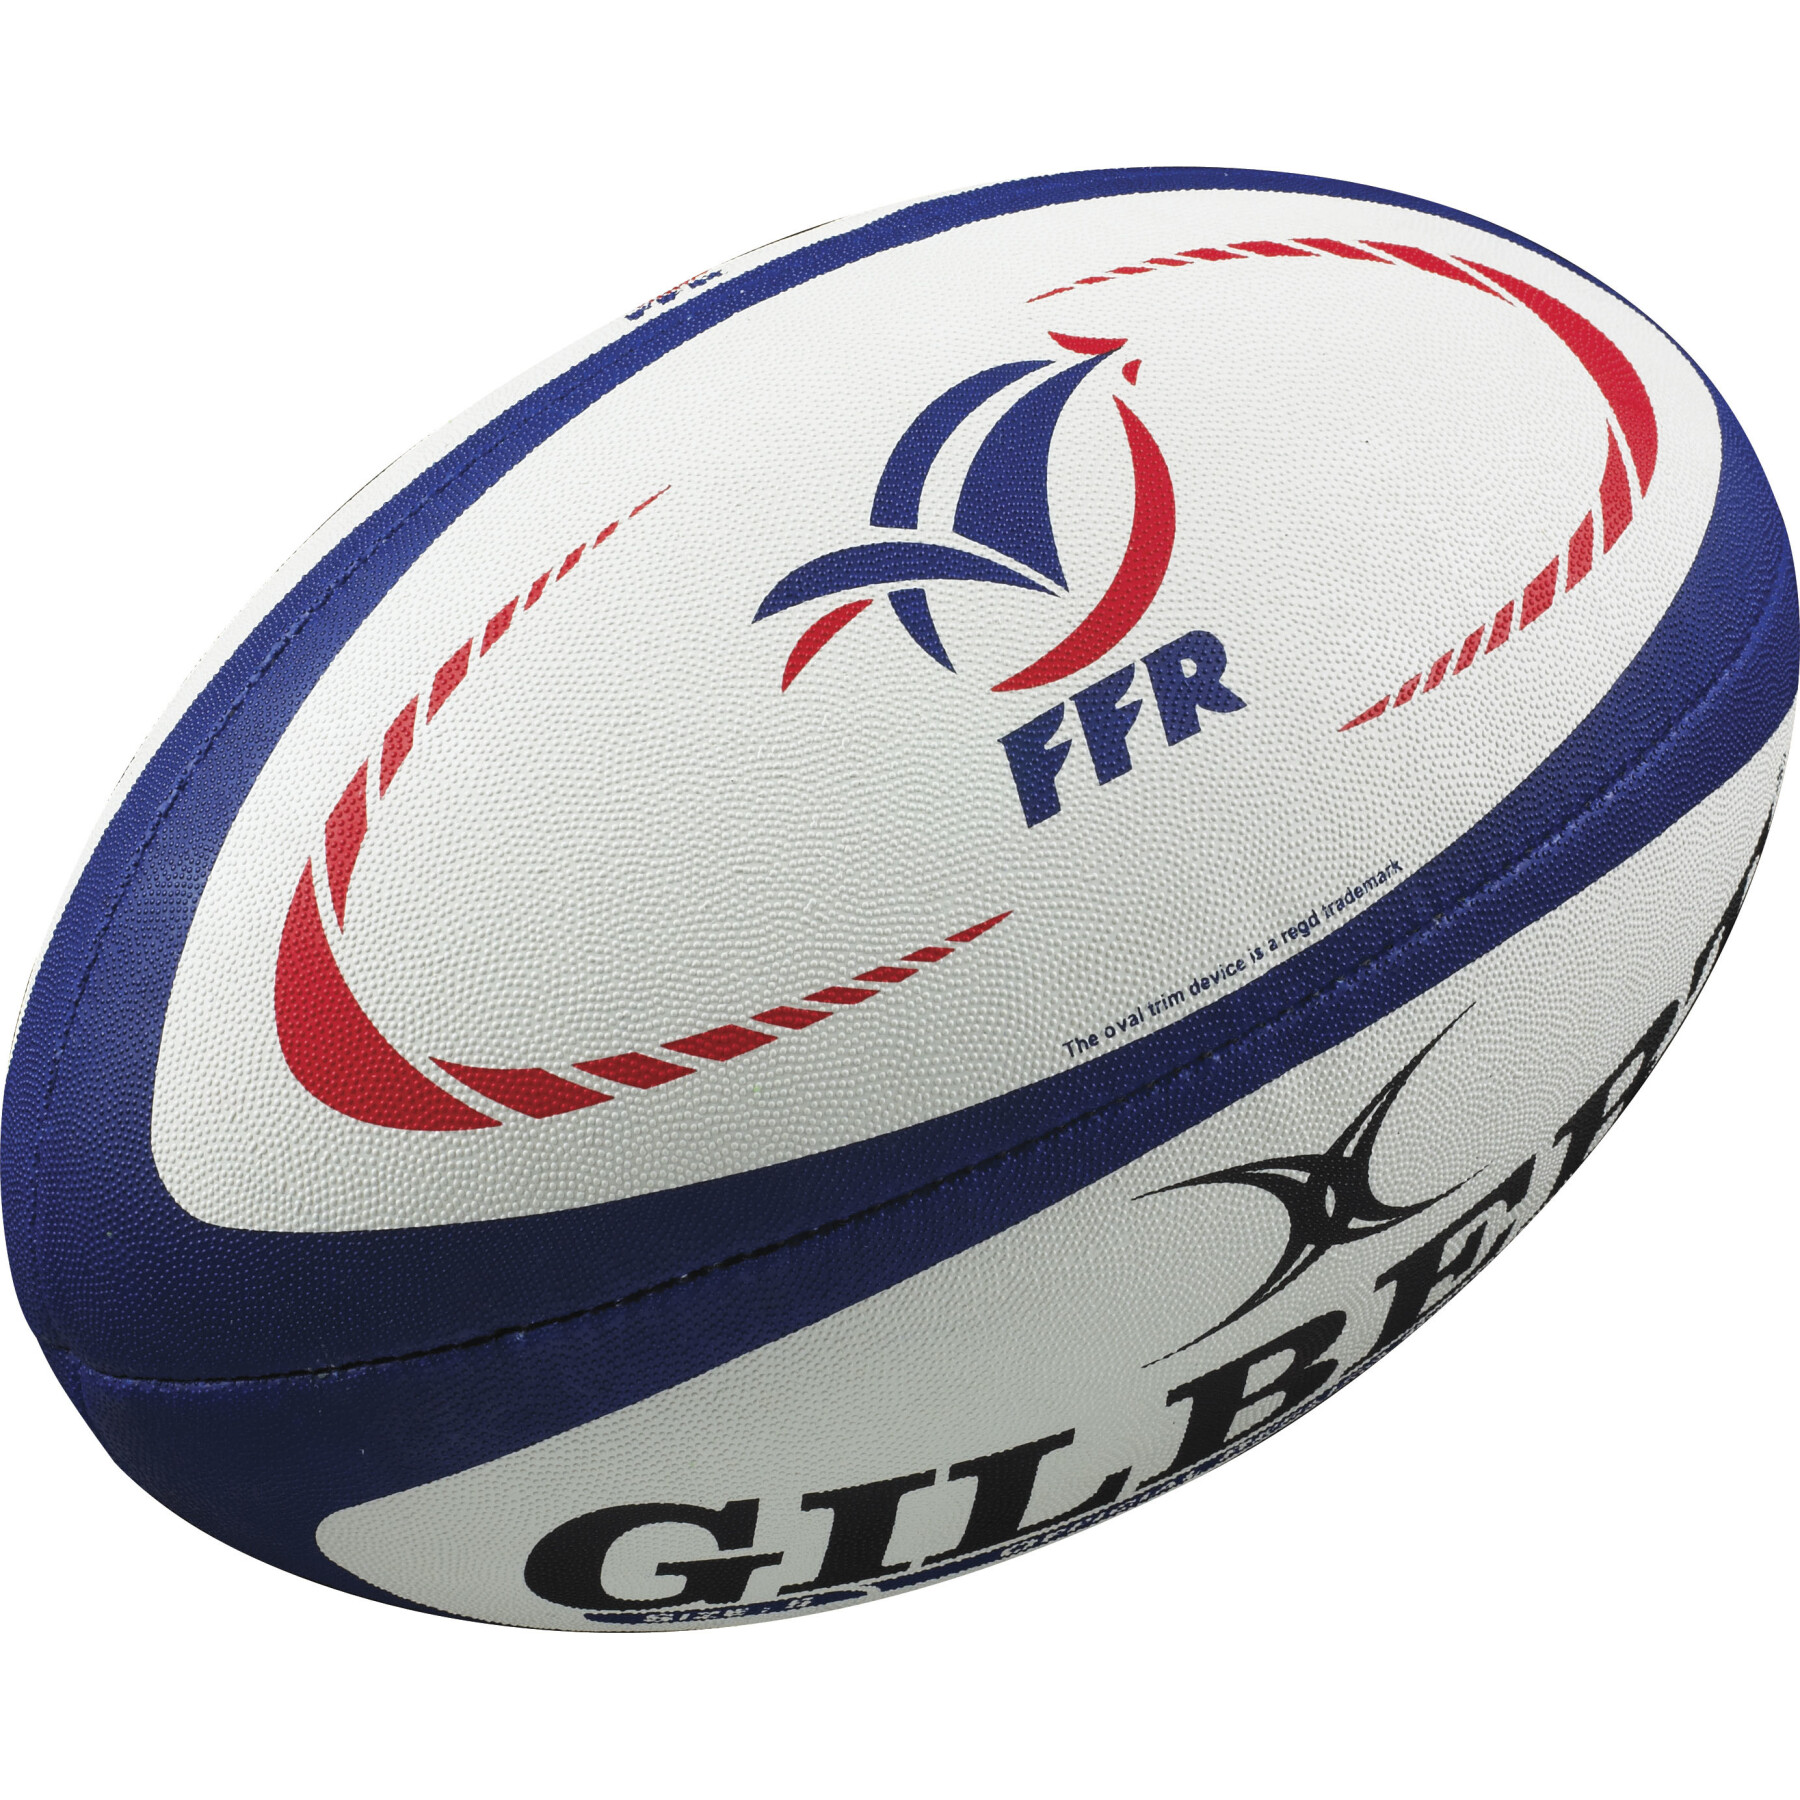 Rugby ball replica Gilbert France (size 5)